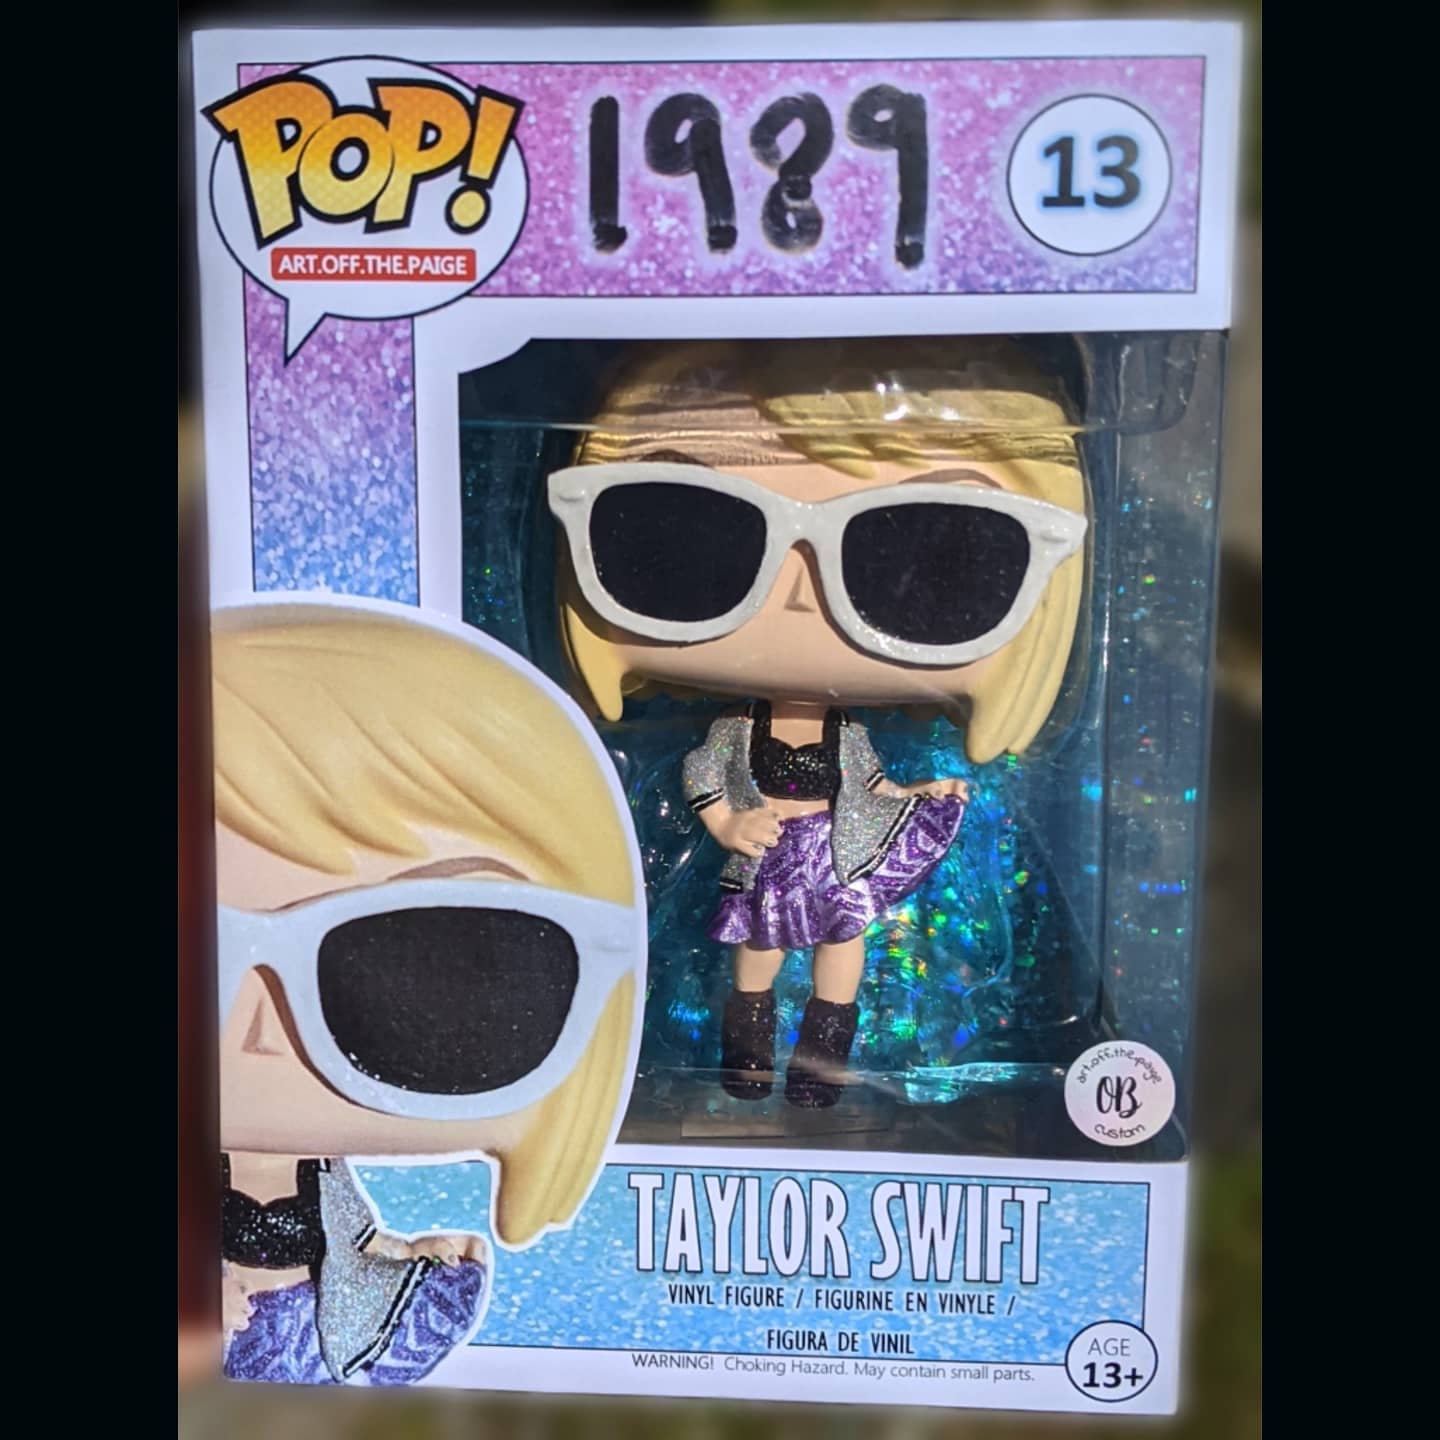 art.off.the.paige on Instagram: CUSTOM Taylor Swift Funko Pop Red  (Taylor's Version) ❤️ . Keychains and Stickers available! . DM for any  inquiries! . #taylor #swift #taylorswift #red #redtaylorsversion #tv  #swiftie #pop #custompop #